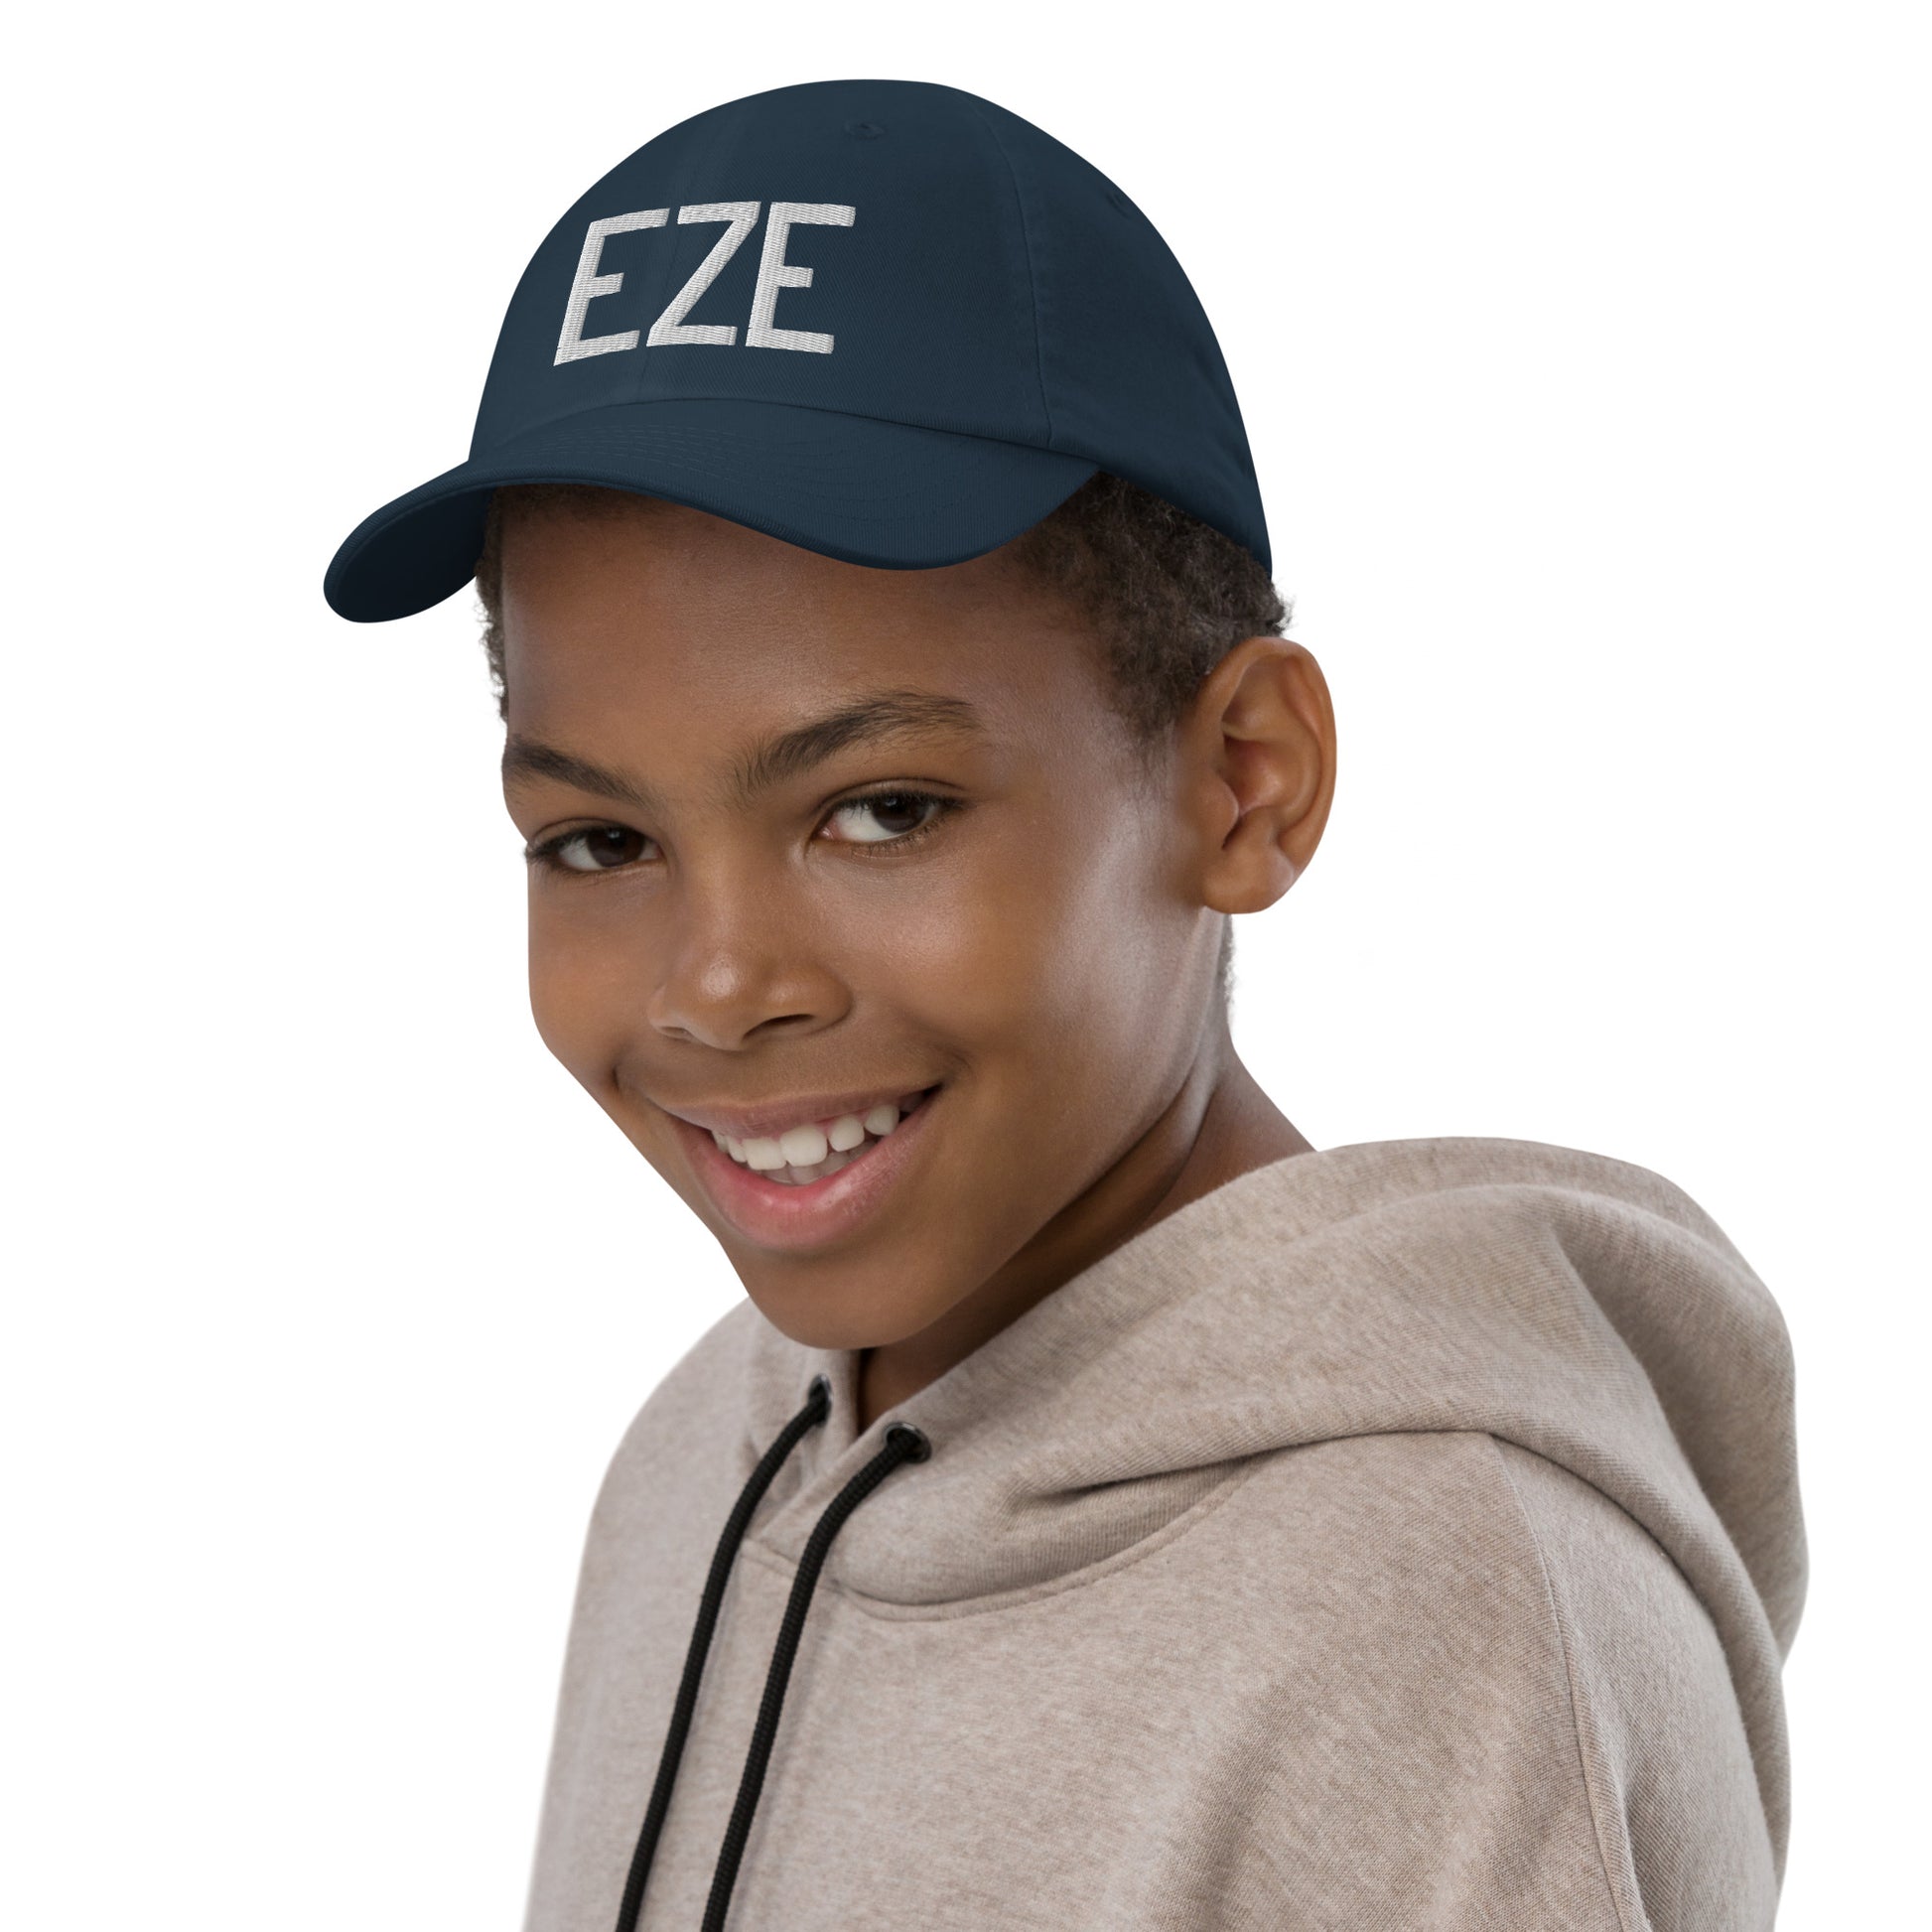 Airport Code Kid's Baseball Cap - White • EZE Buenos Aires • YHM Designs - Image 03